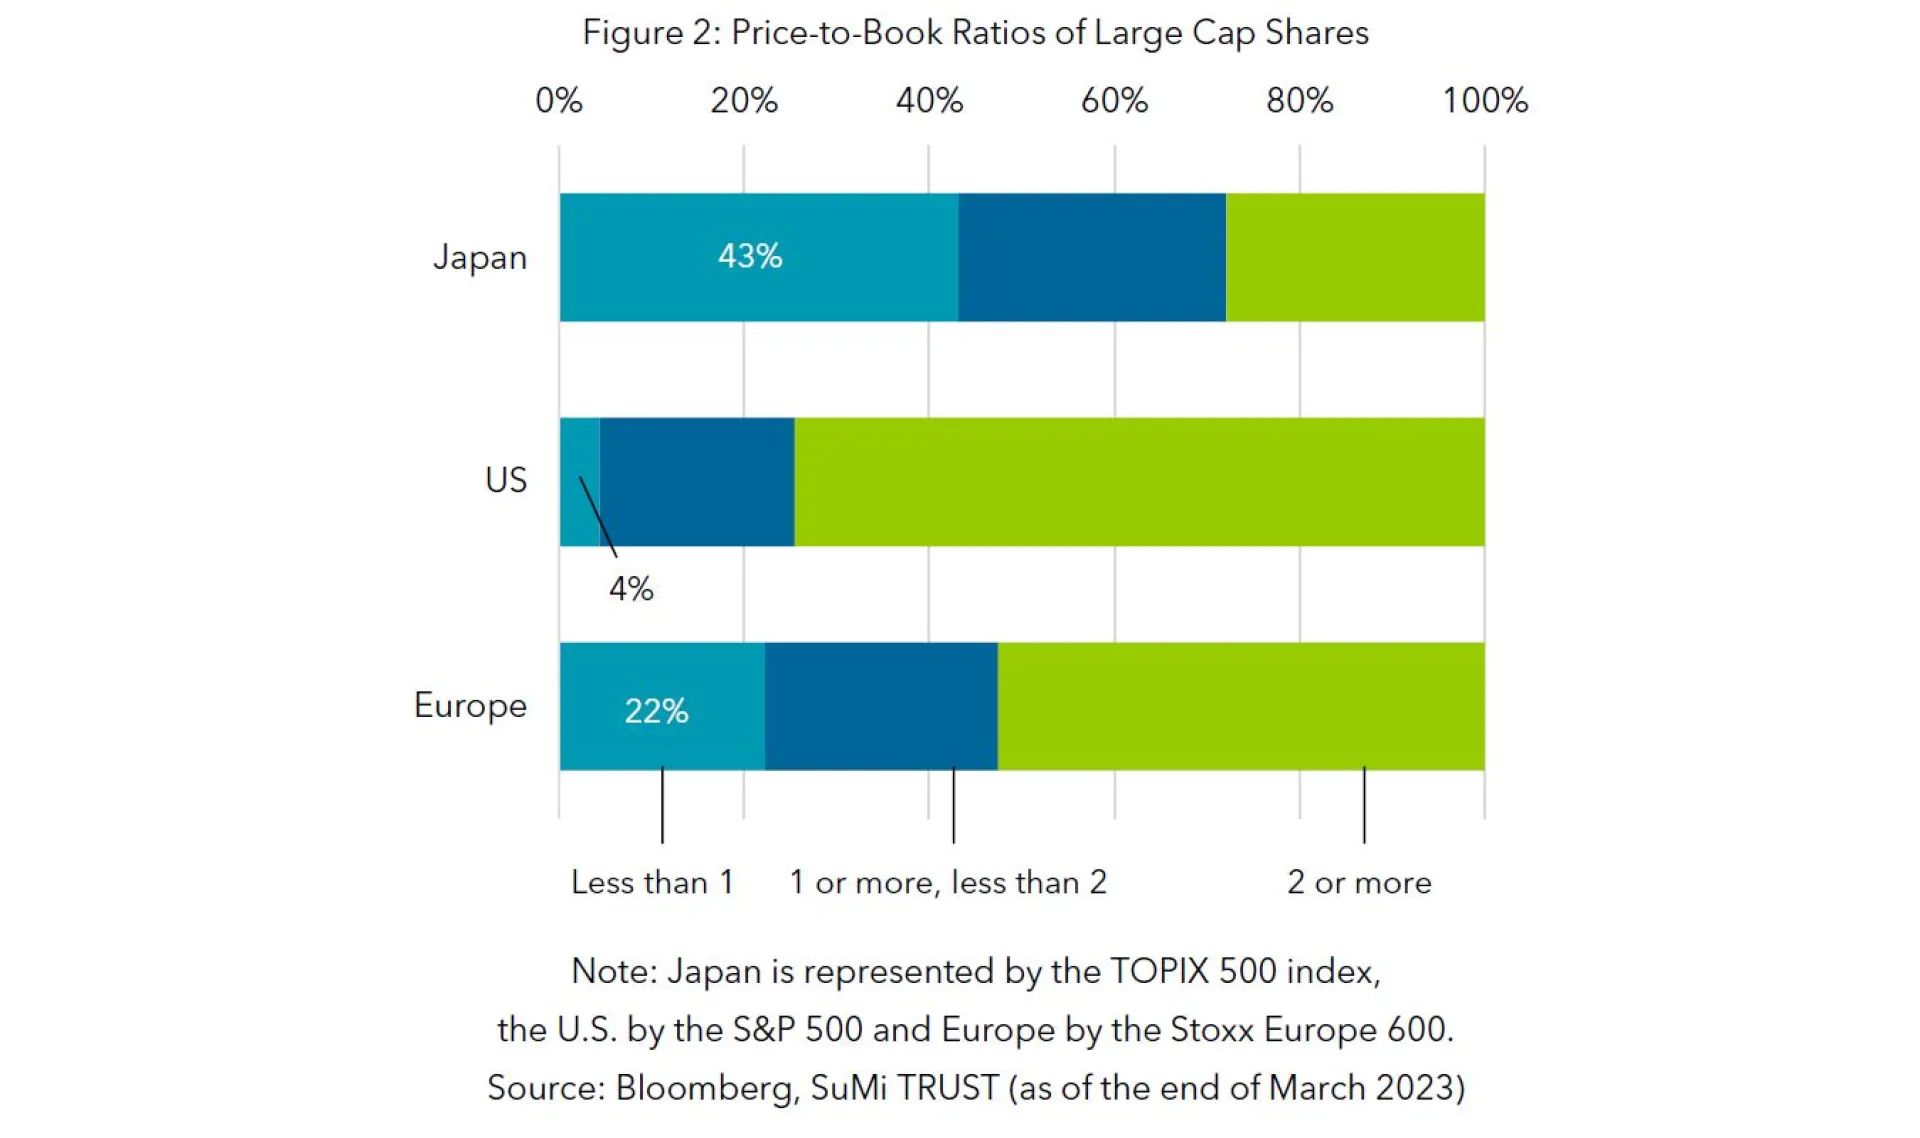 Figure 2 Price-to-Book Ratios of Large Cap Shares